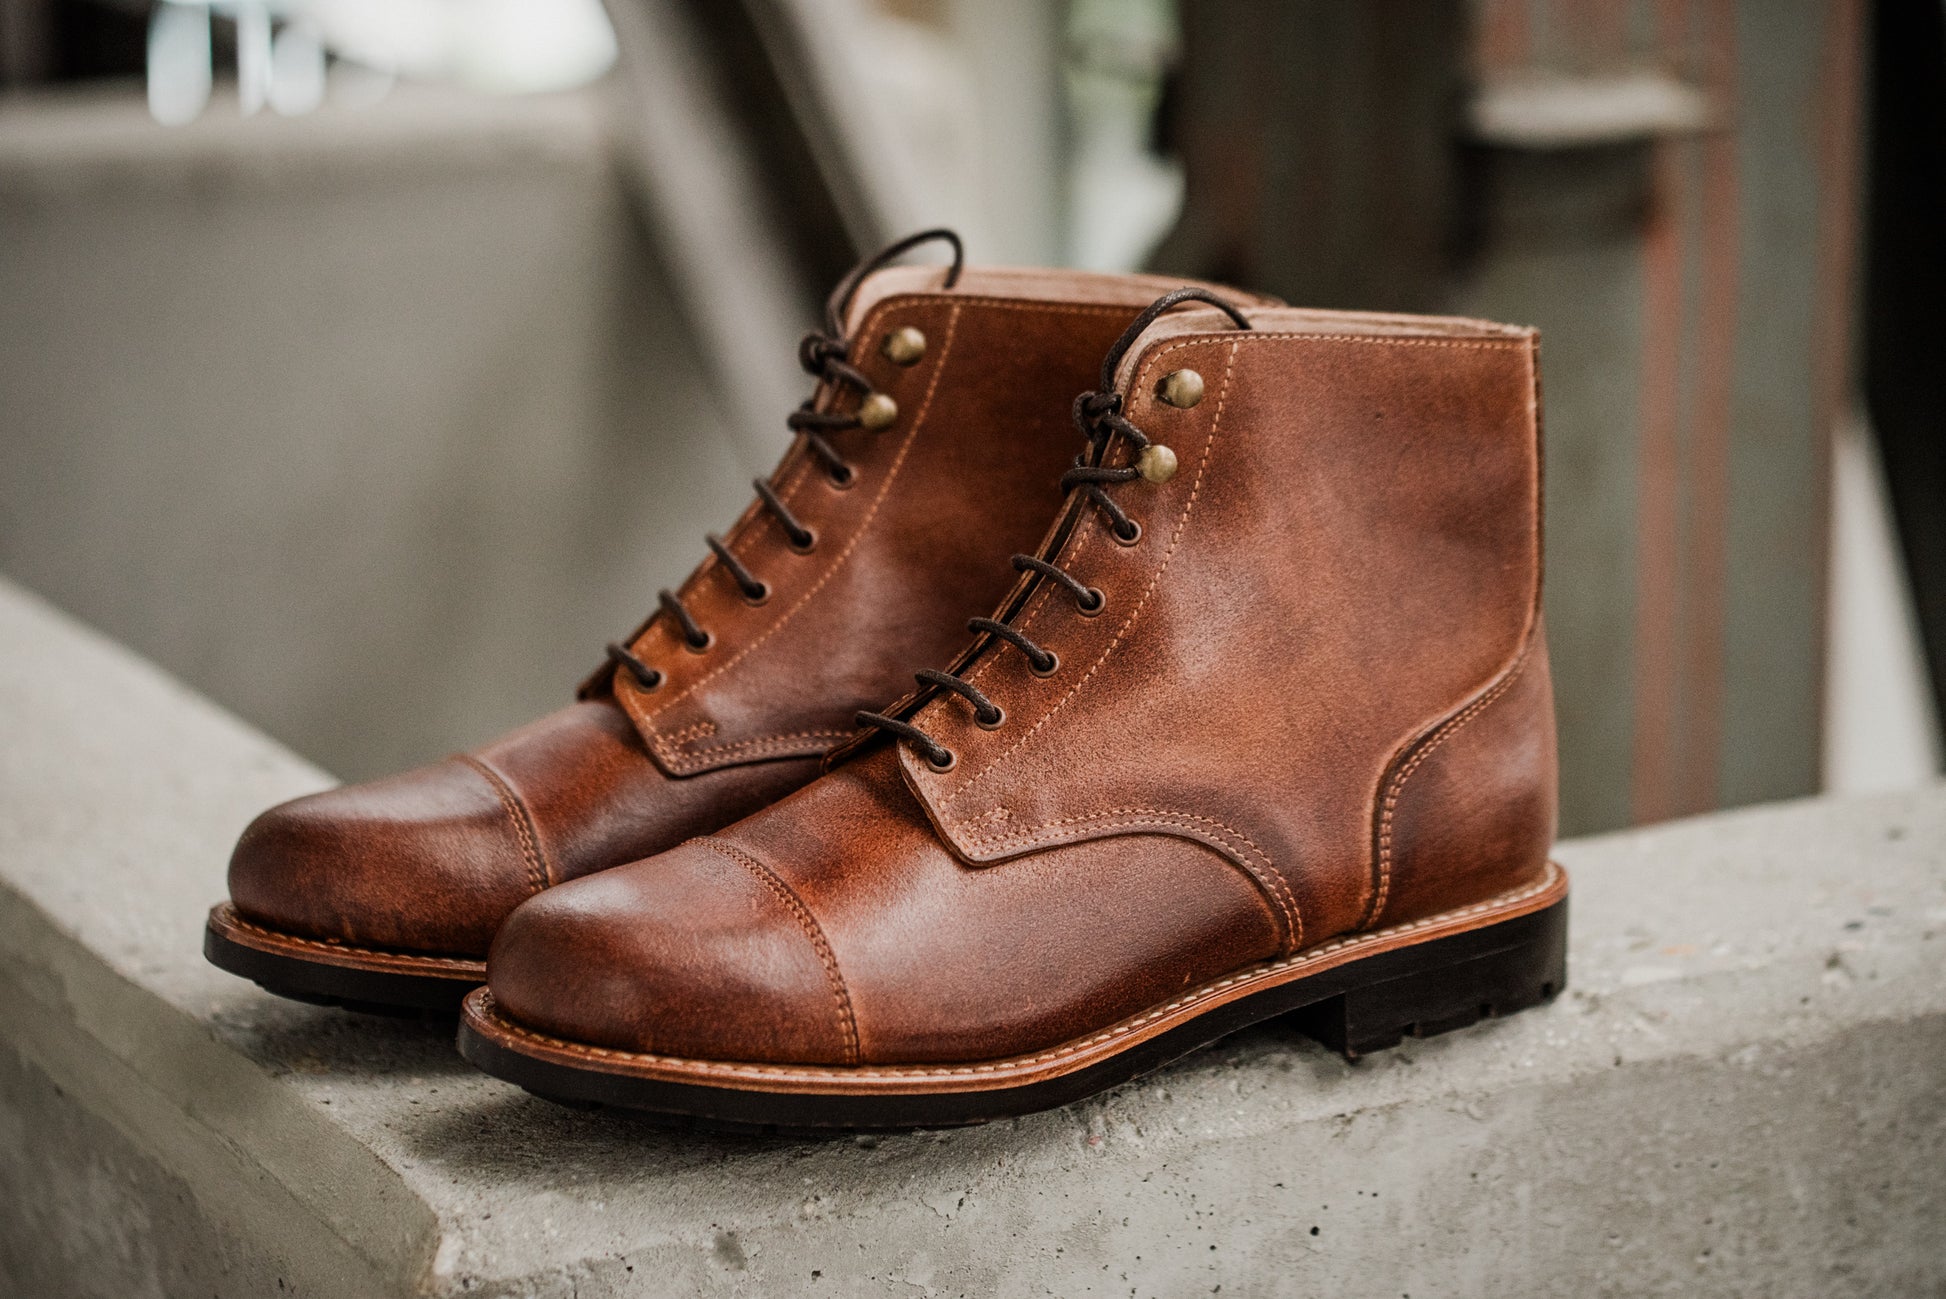 Tejo Boots Military Sole - OldMulla - Boots Store, Handmade By George Family